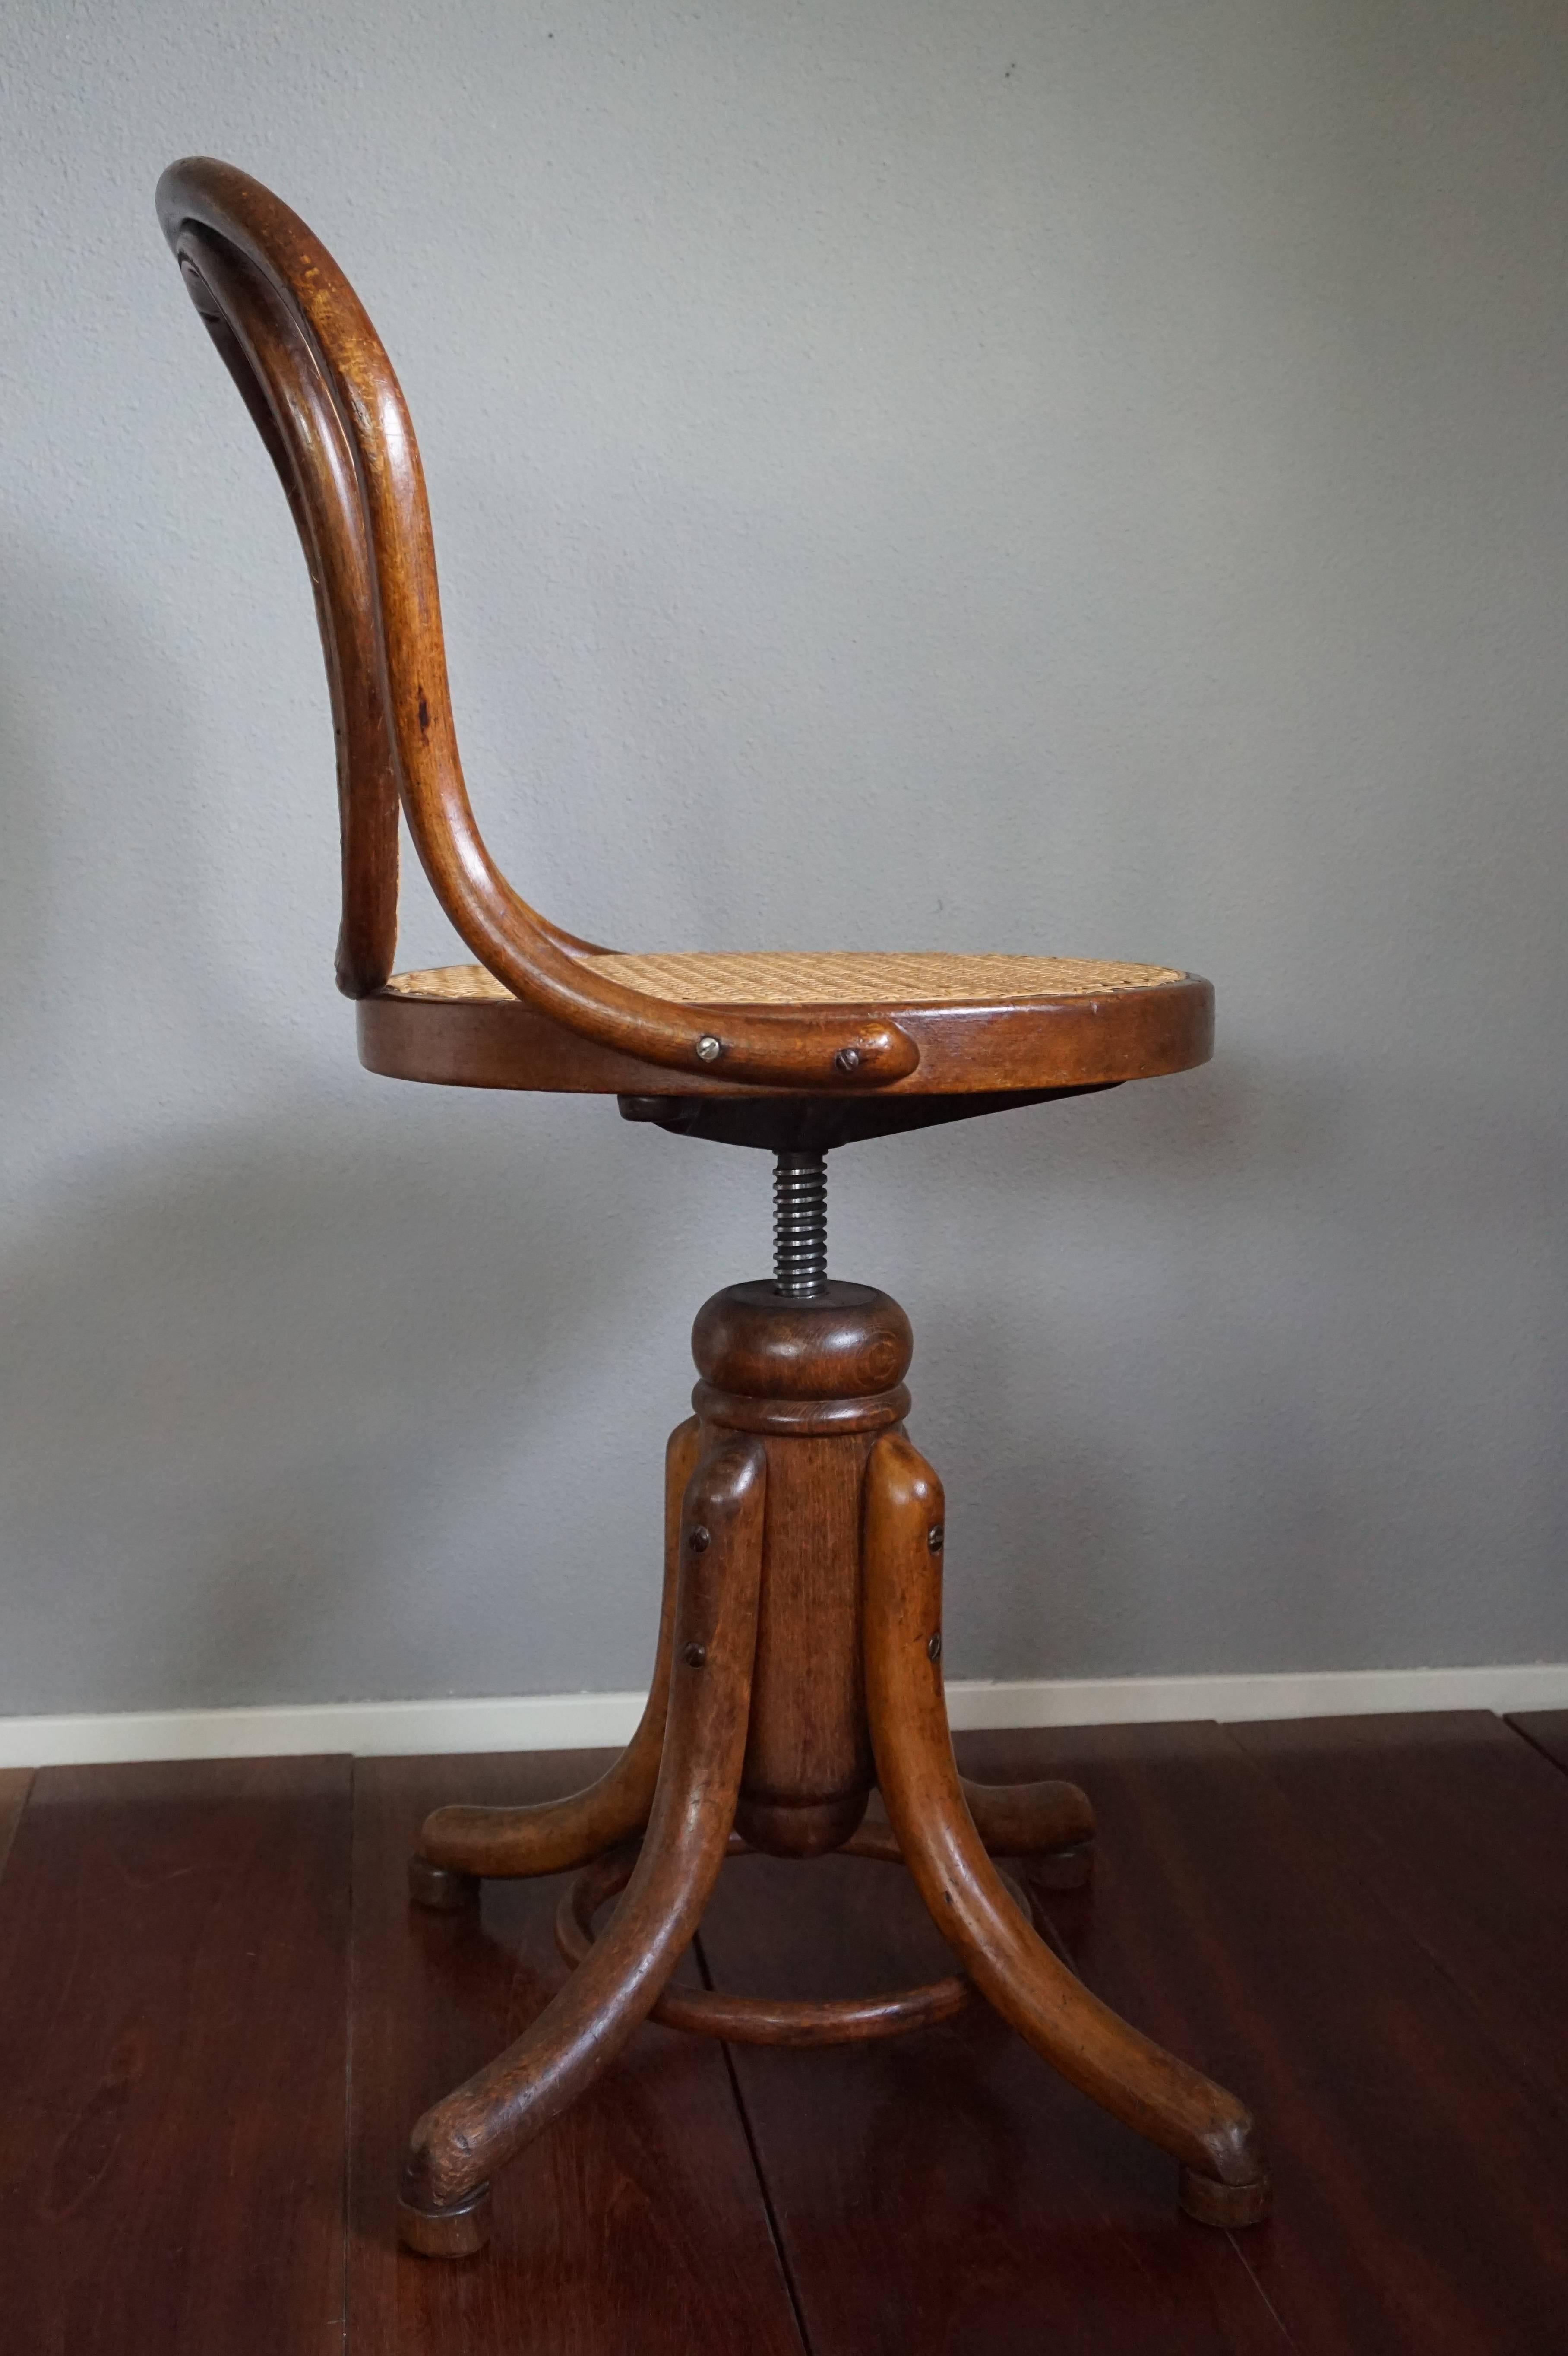 Hand-Crafted Elegant Viennese Thonet Bentwood and Webbing Ladies Desk or Piano Swivel Chair